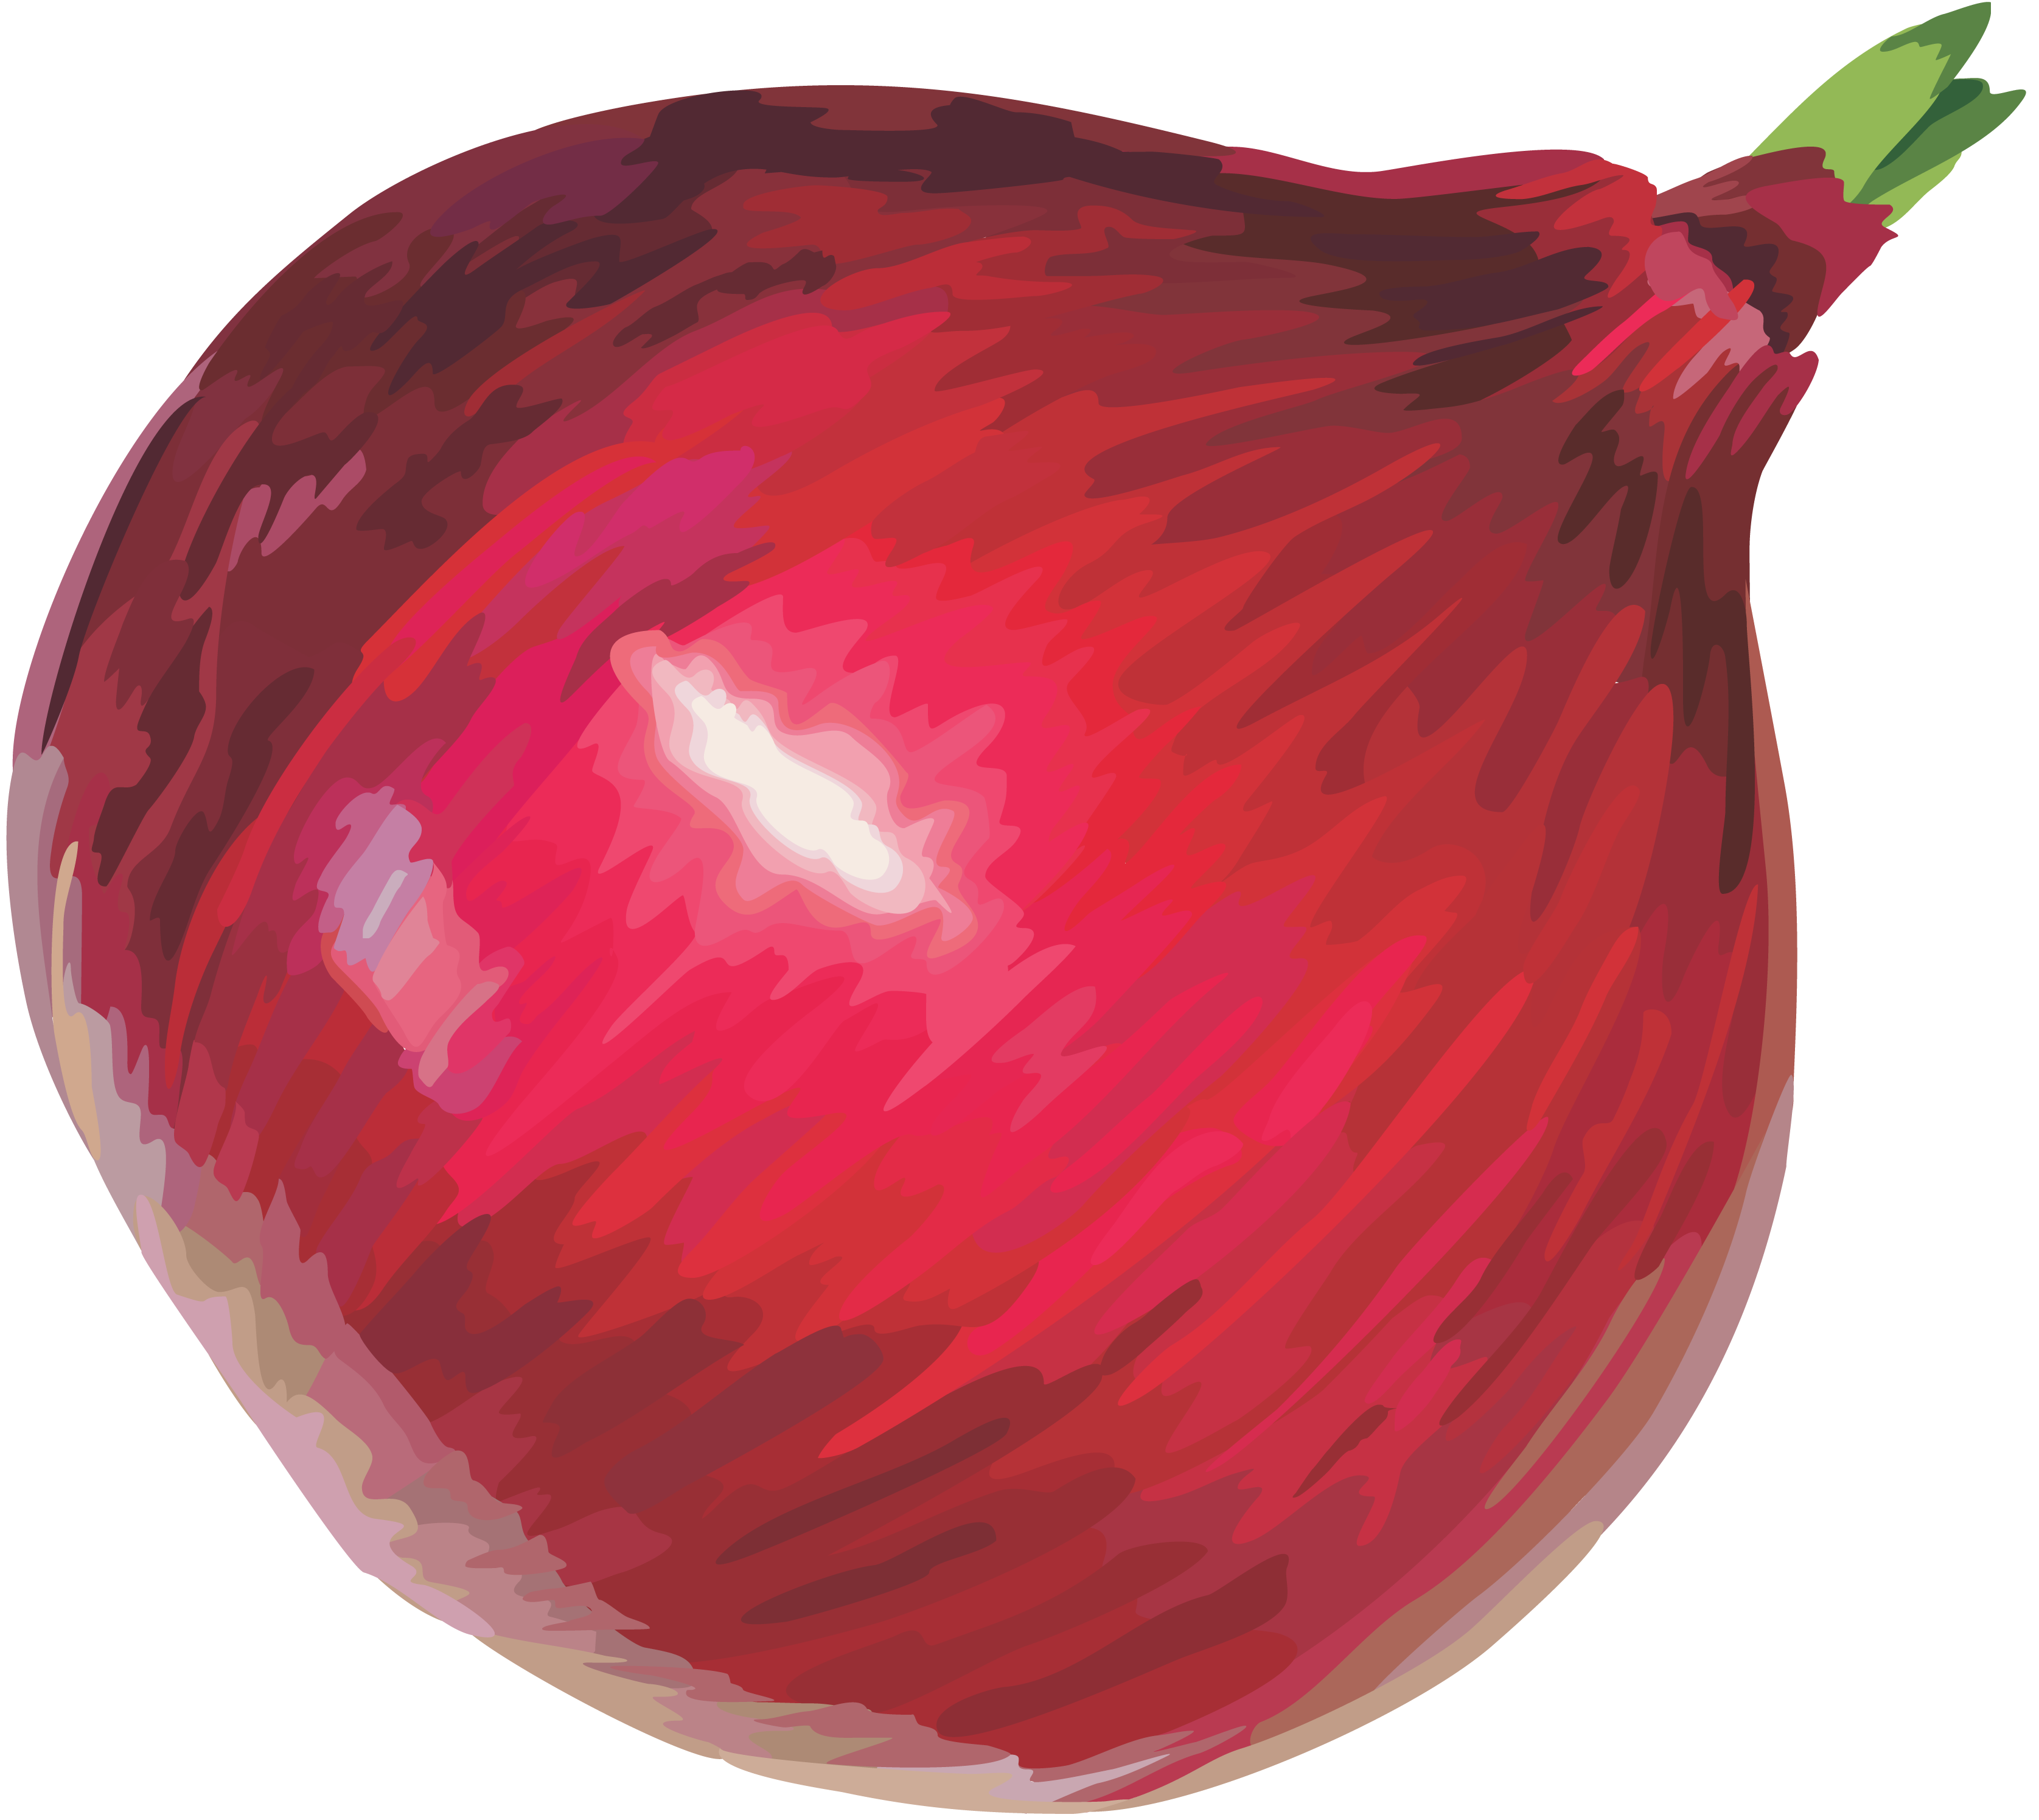 Onion PNG images Download